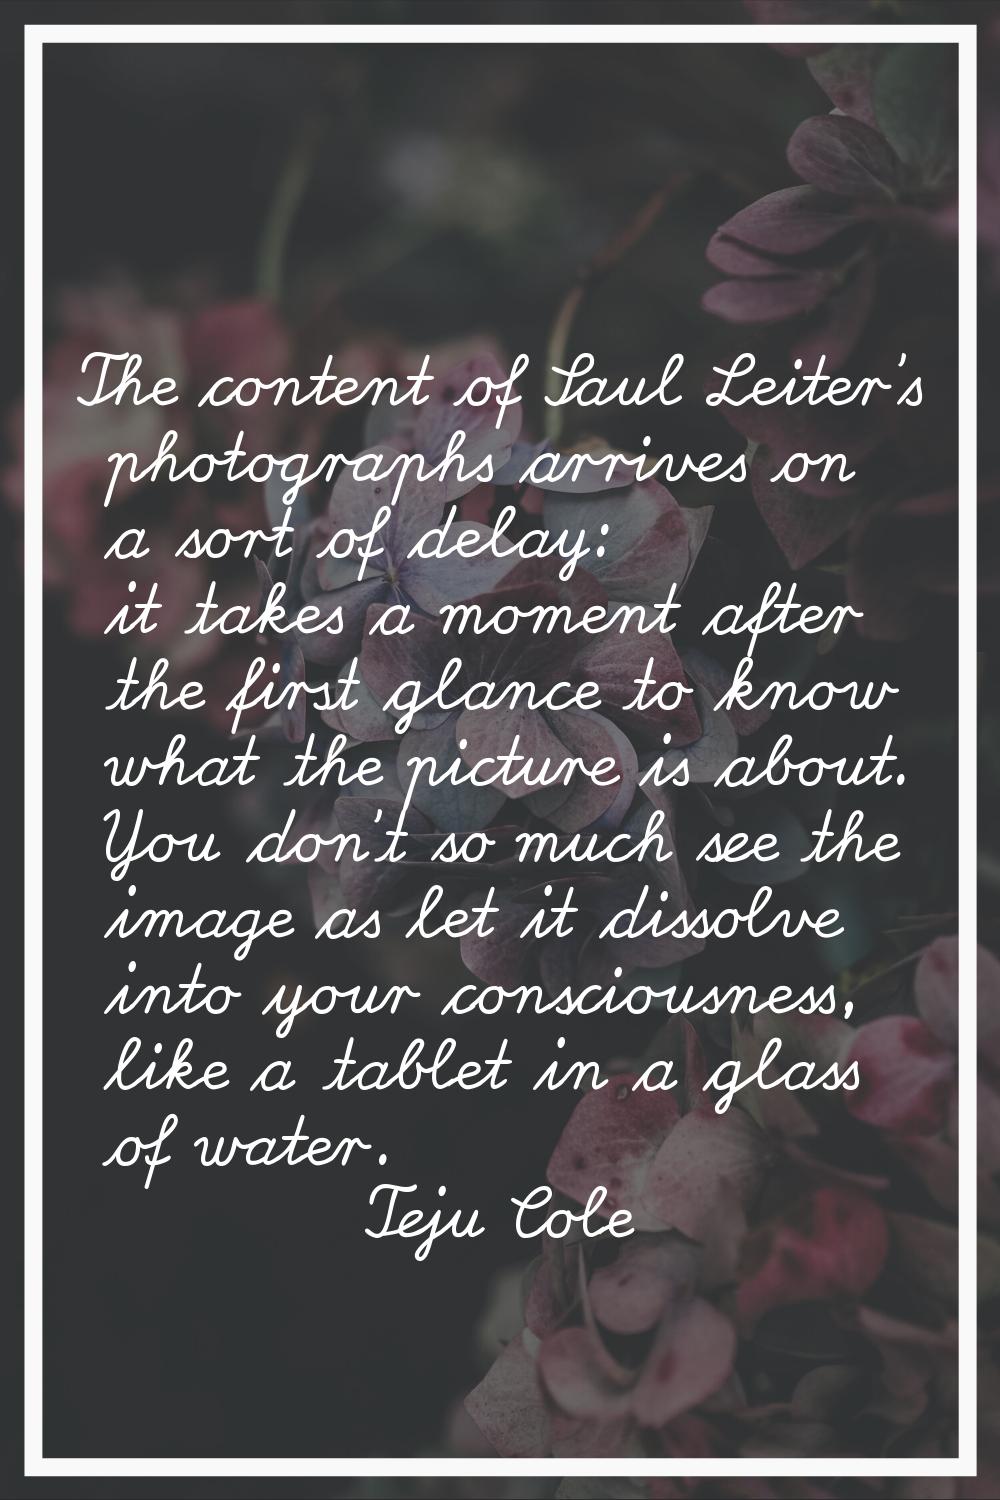 The content of Saul Leiter's photographs arrives on a sort of delay: it takes a moment after the fi